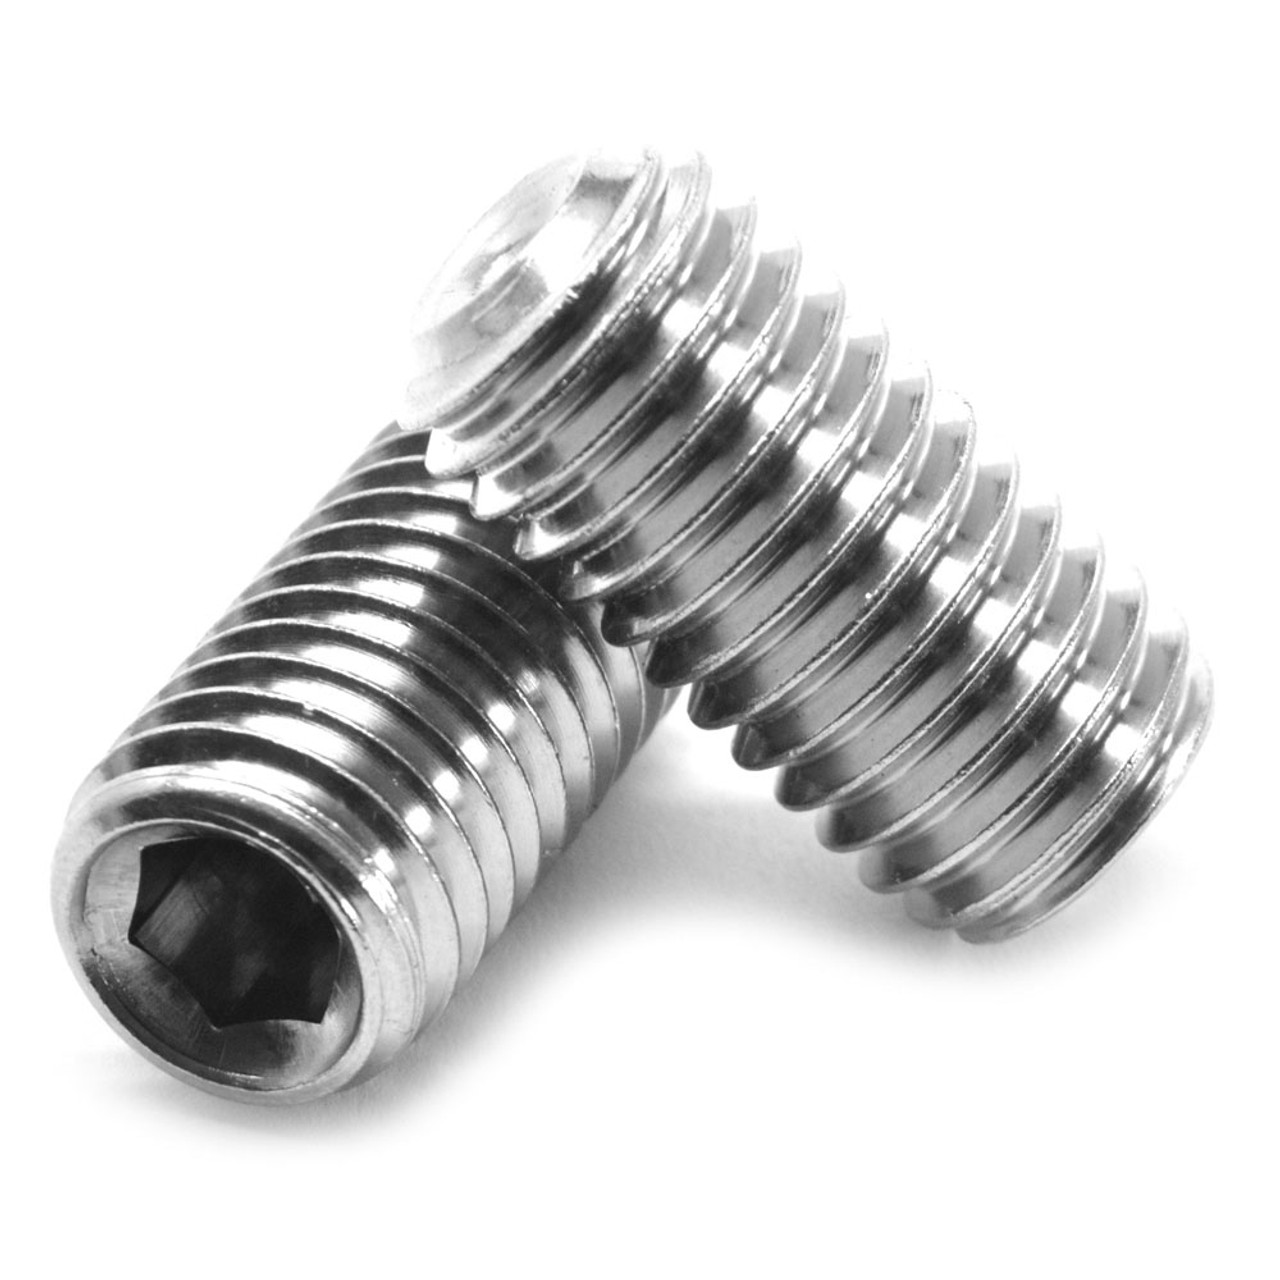 #10-24 x 5/16" Coarse Thread Socket Set Screw Cup Point Stainless Steel 18-8